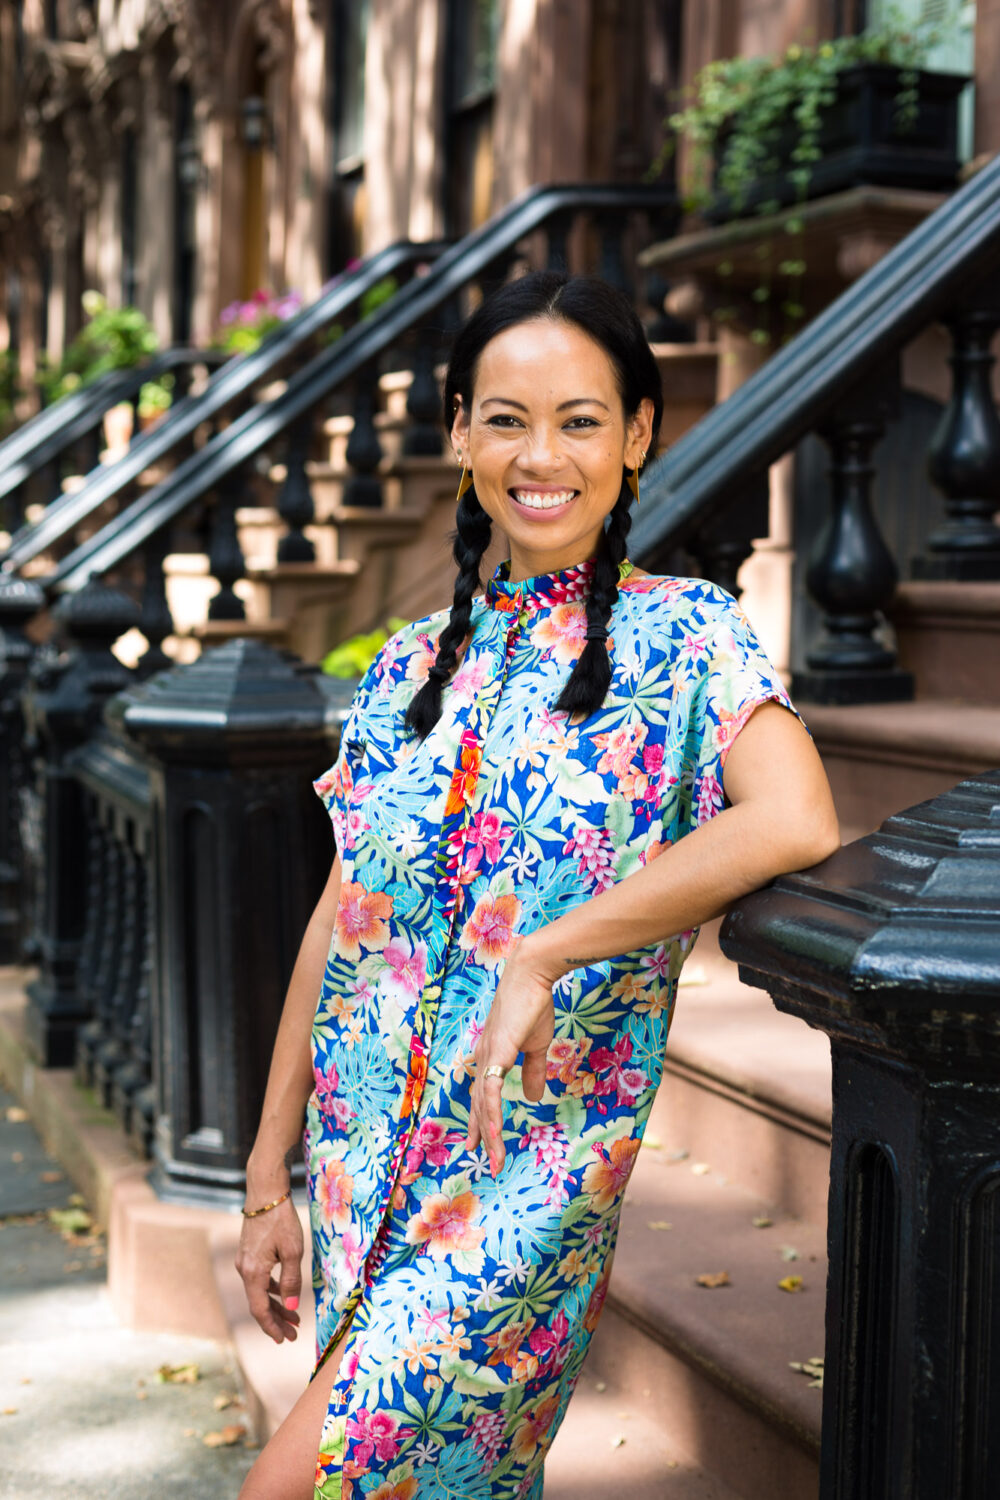 New to ShopCaribe.com: Limited Edition designs from Anya Ayoung Chee – Winner, Project Runway